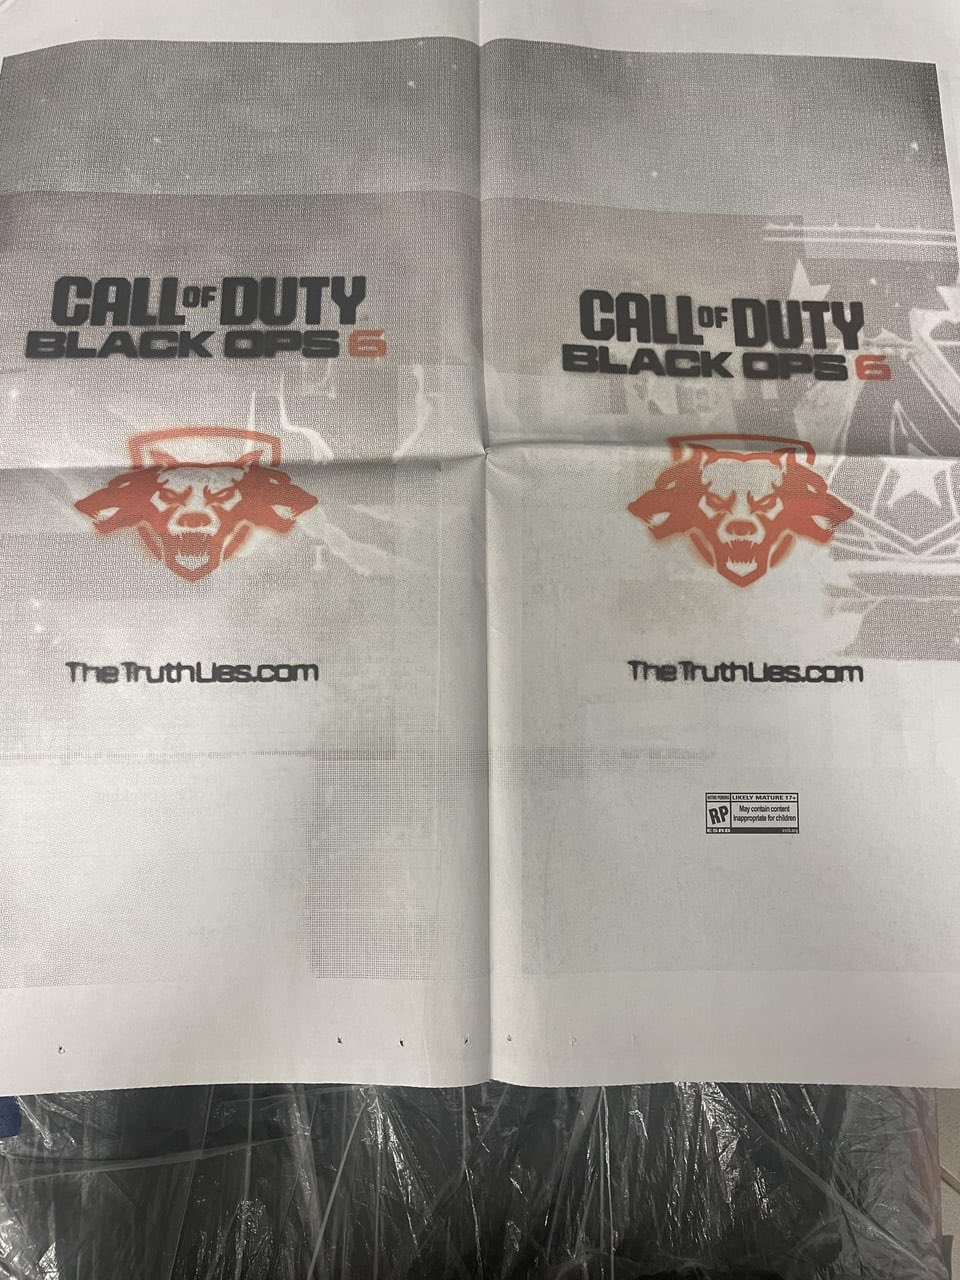 Black Ops 6 Logo Revealed by Newspaper Advertisements